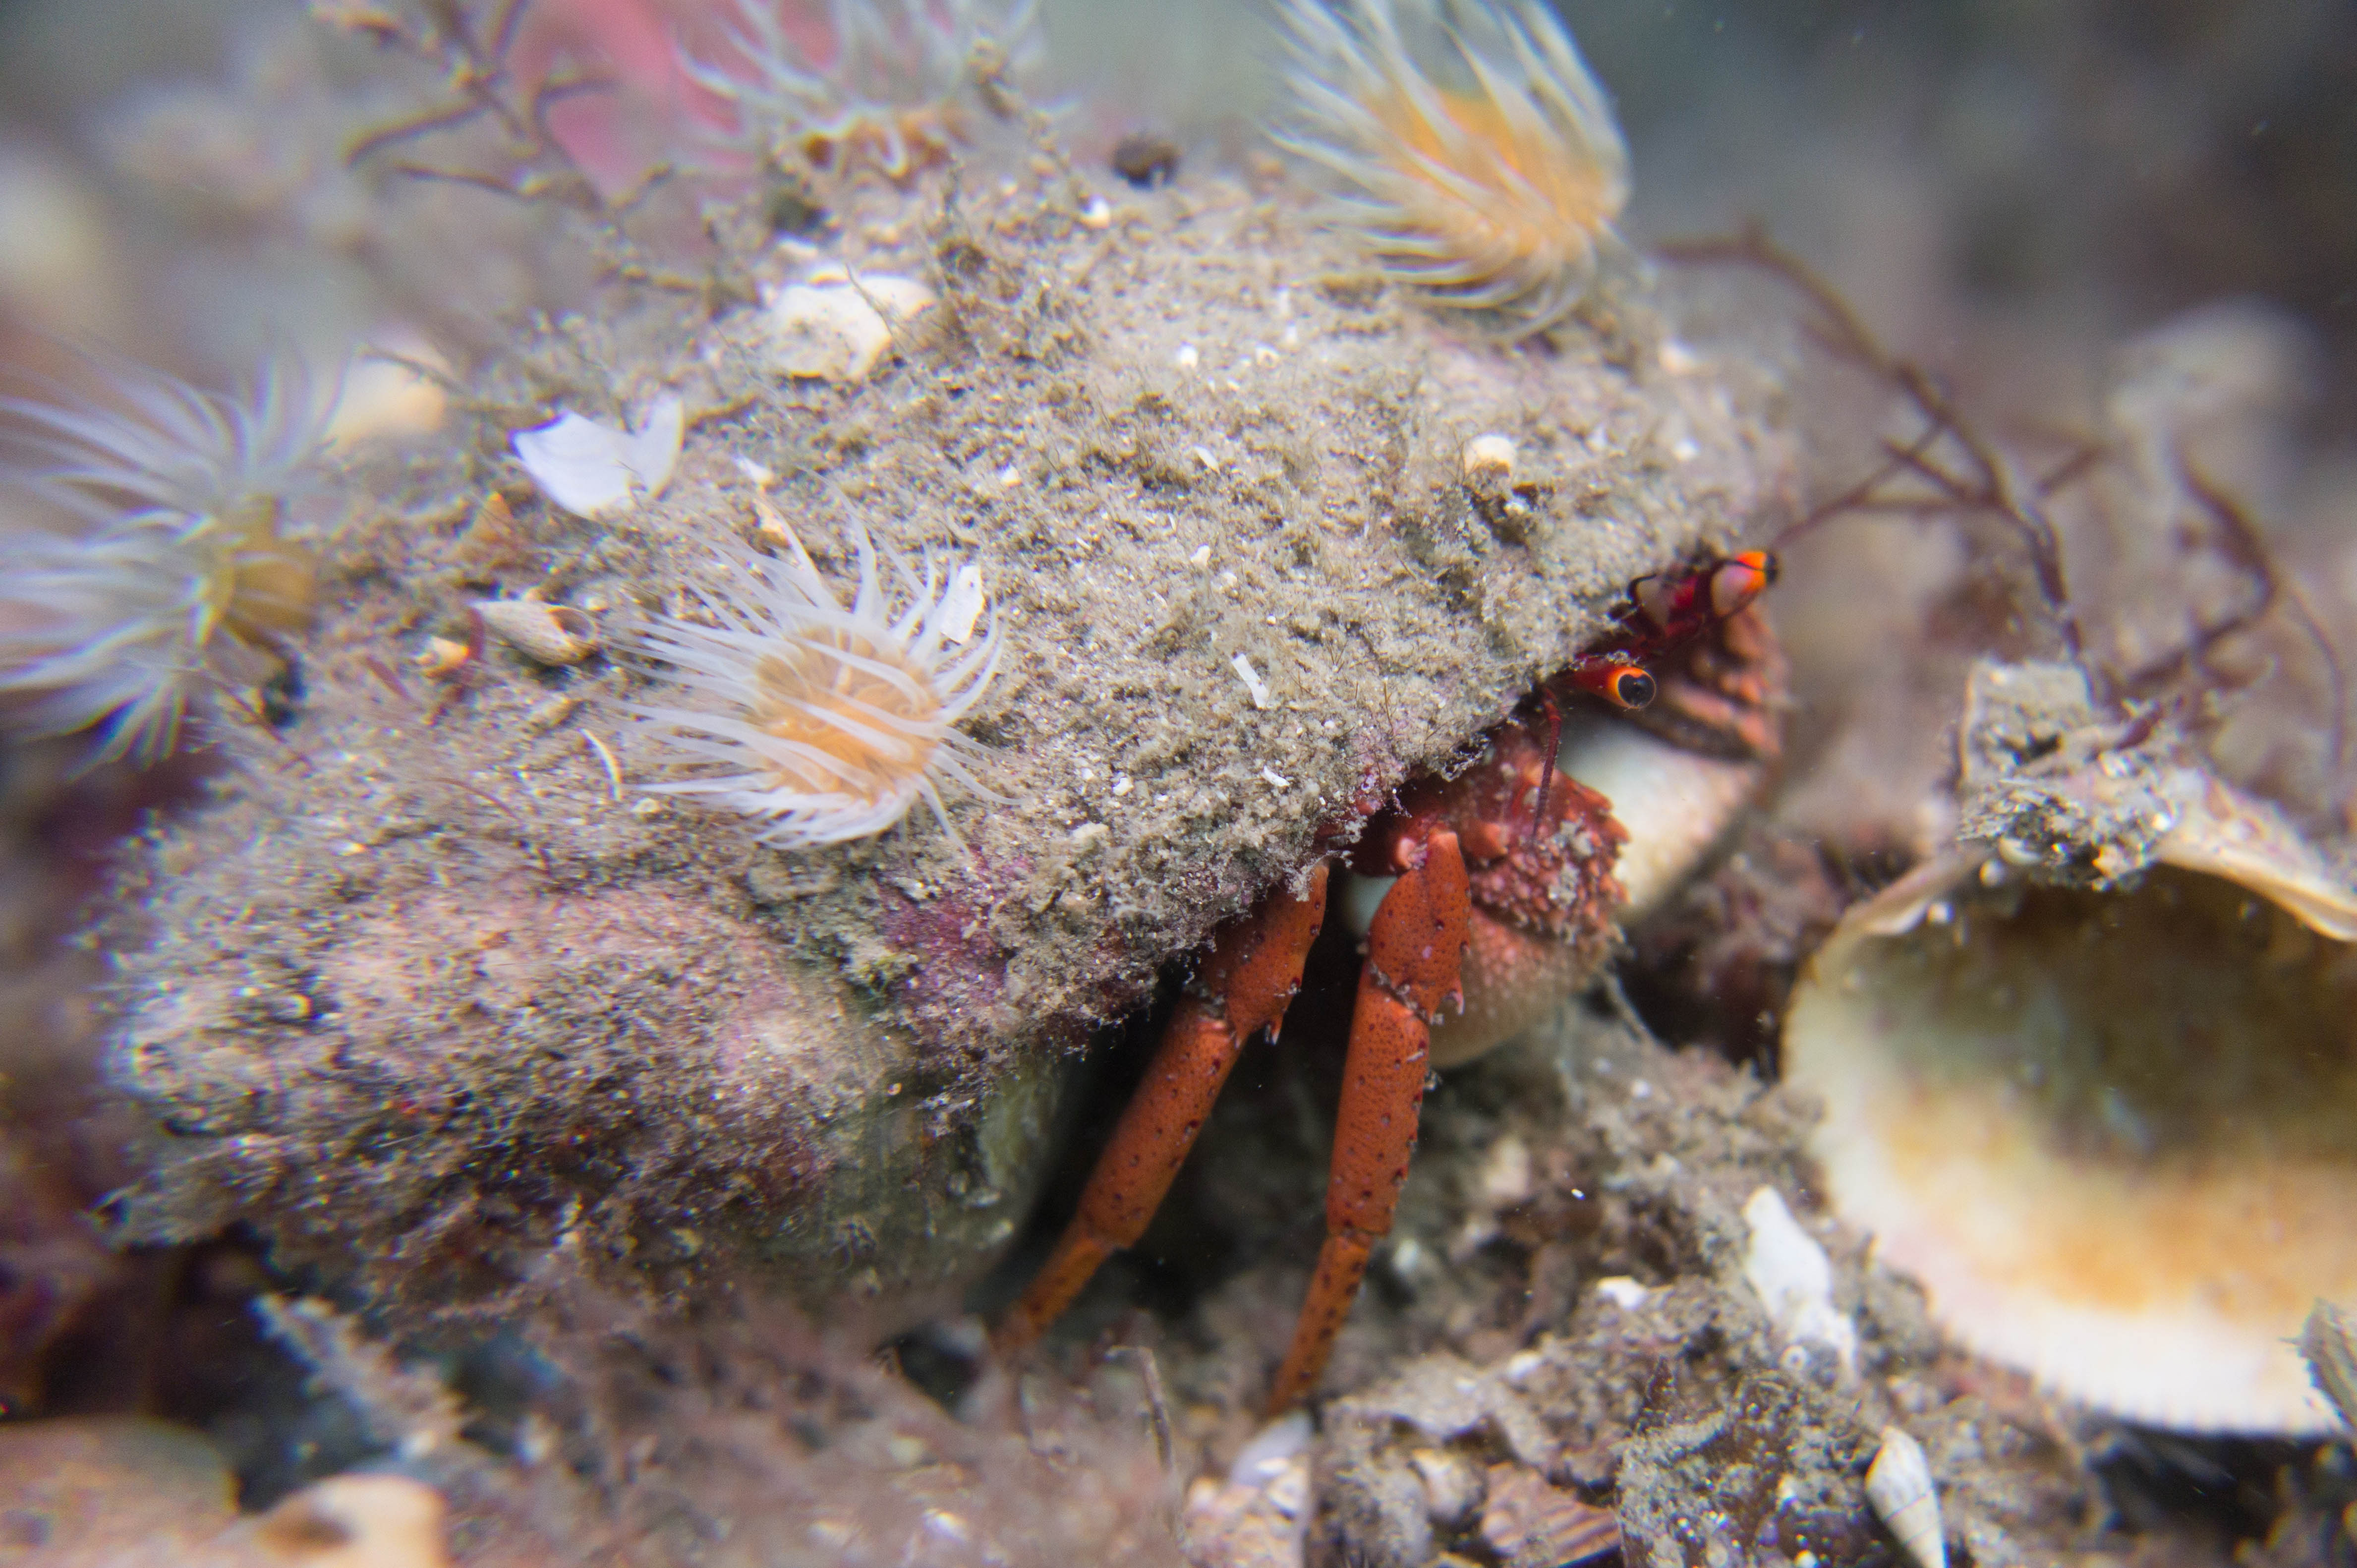 The common hermit crab and some piggybacking anemones